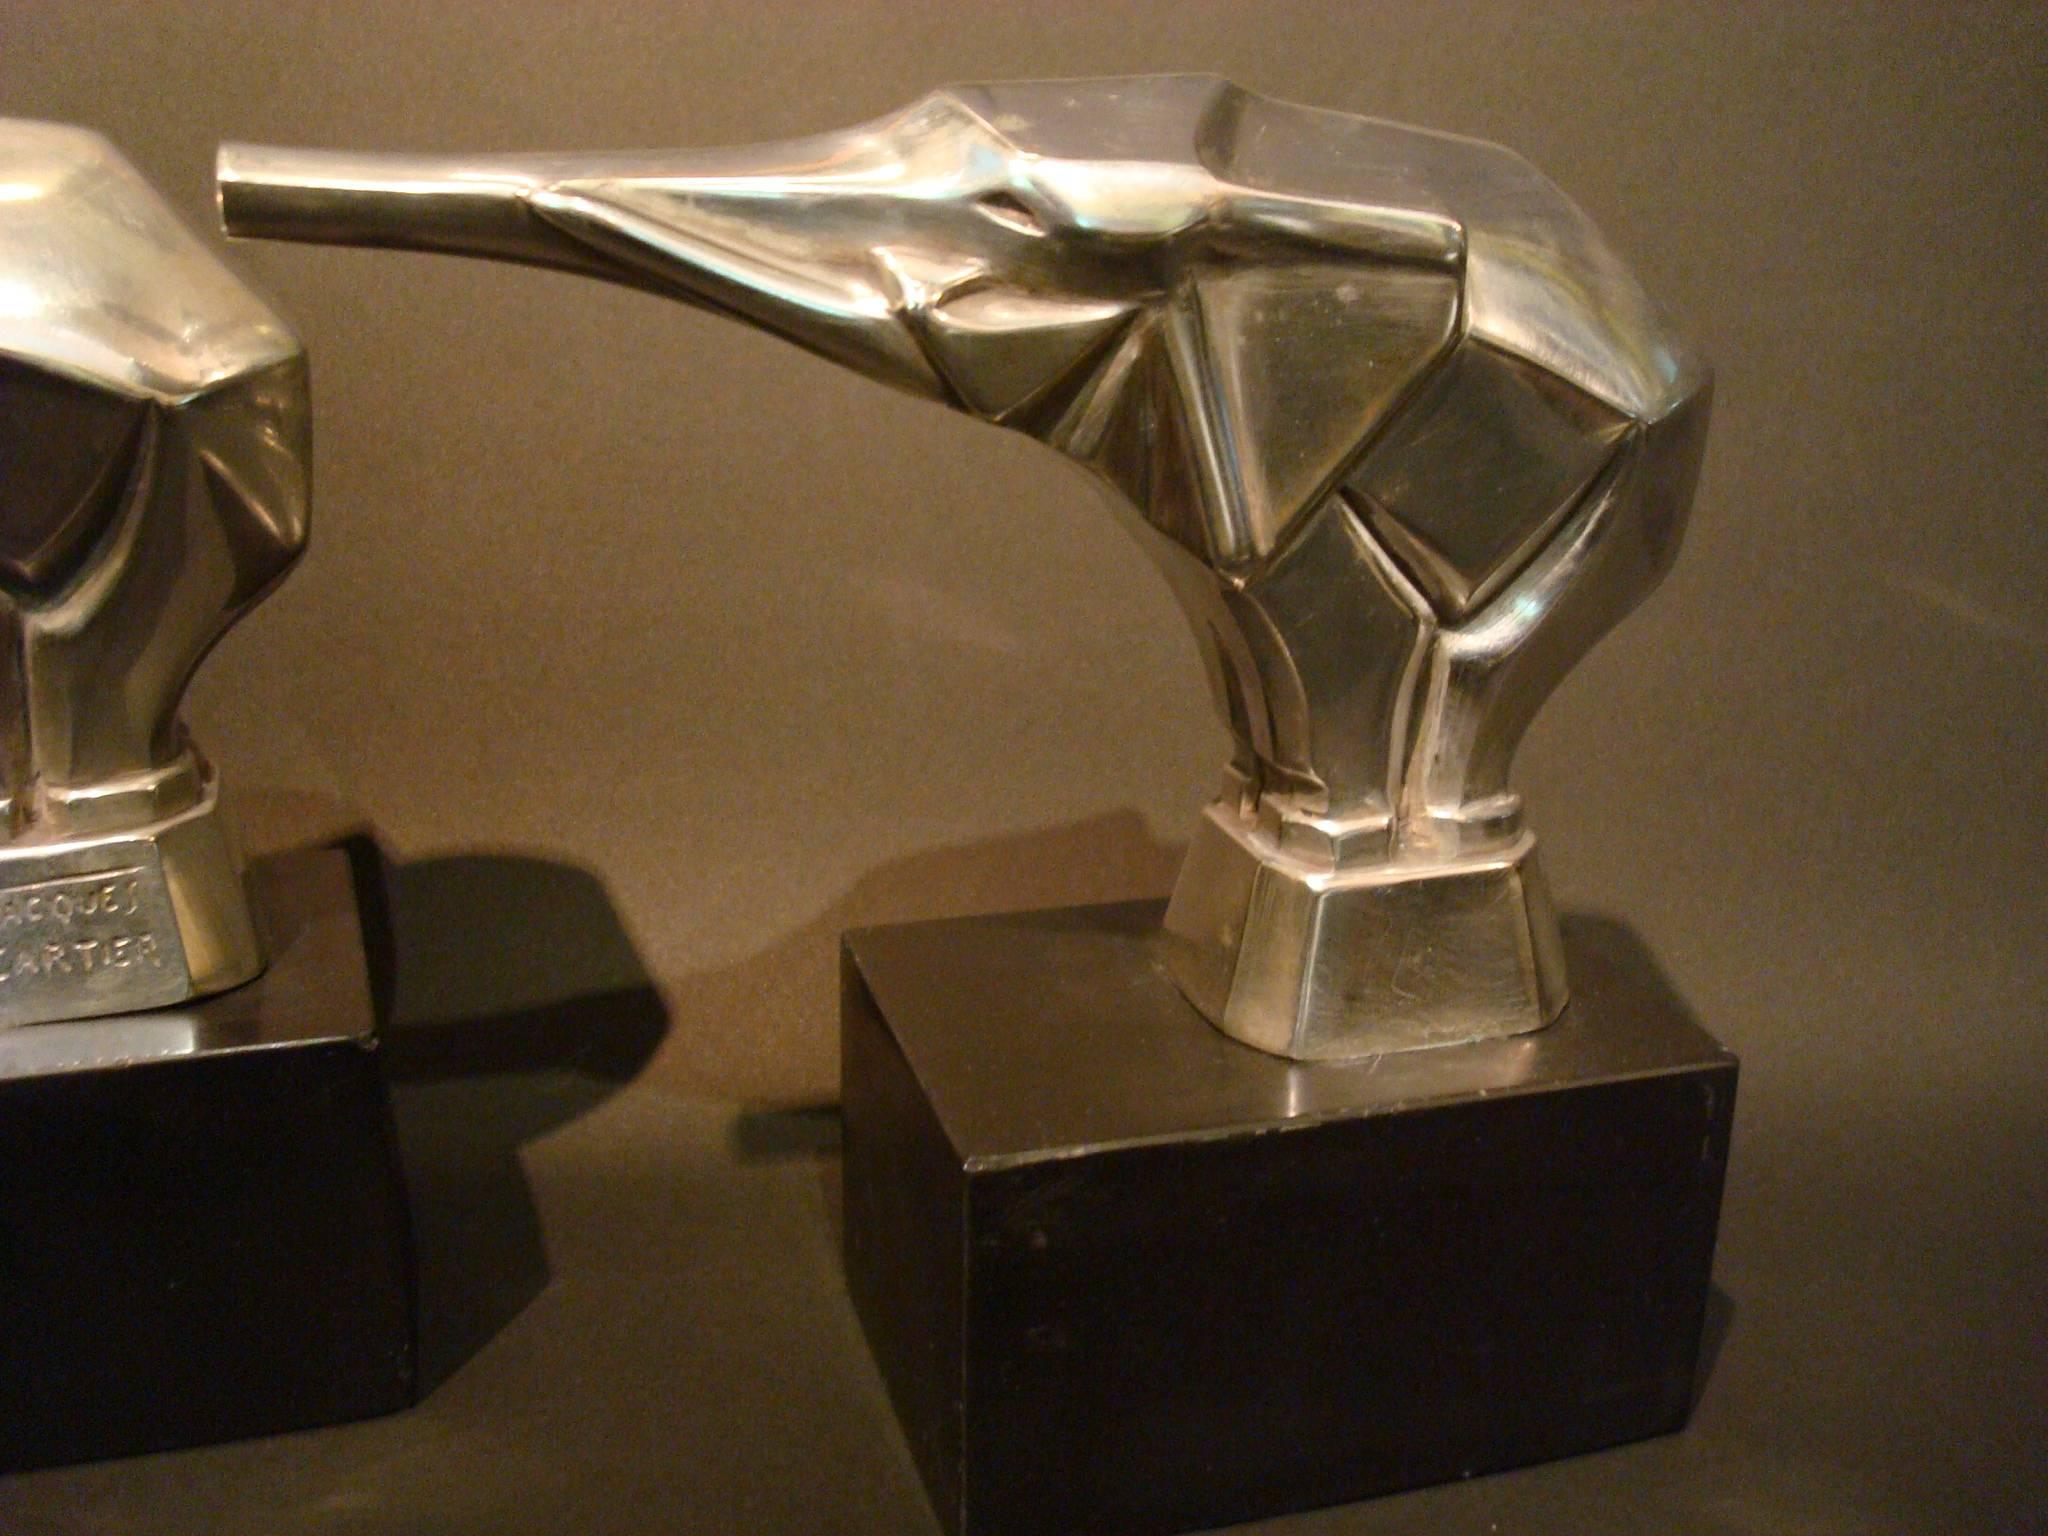 Jacques Cartier exceptional pair of Bookends,  mounted on two marble bases.
Silver plated bronze elephants Marked Jacques Cartier.
Both of the pieces are stamped,
France, circa 1930.
Beautiful, silvered bronze, cubist sculpture of an elephant.